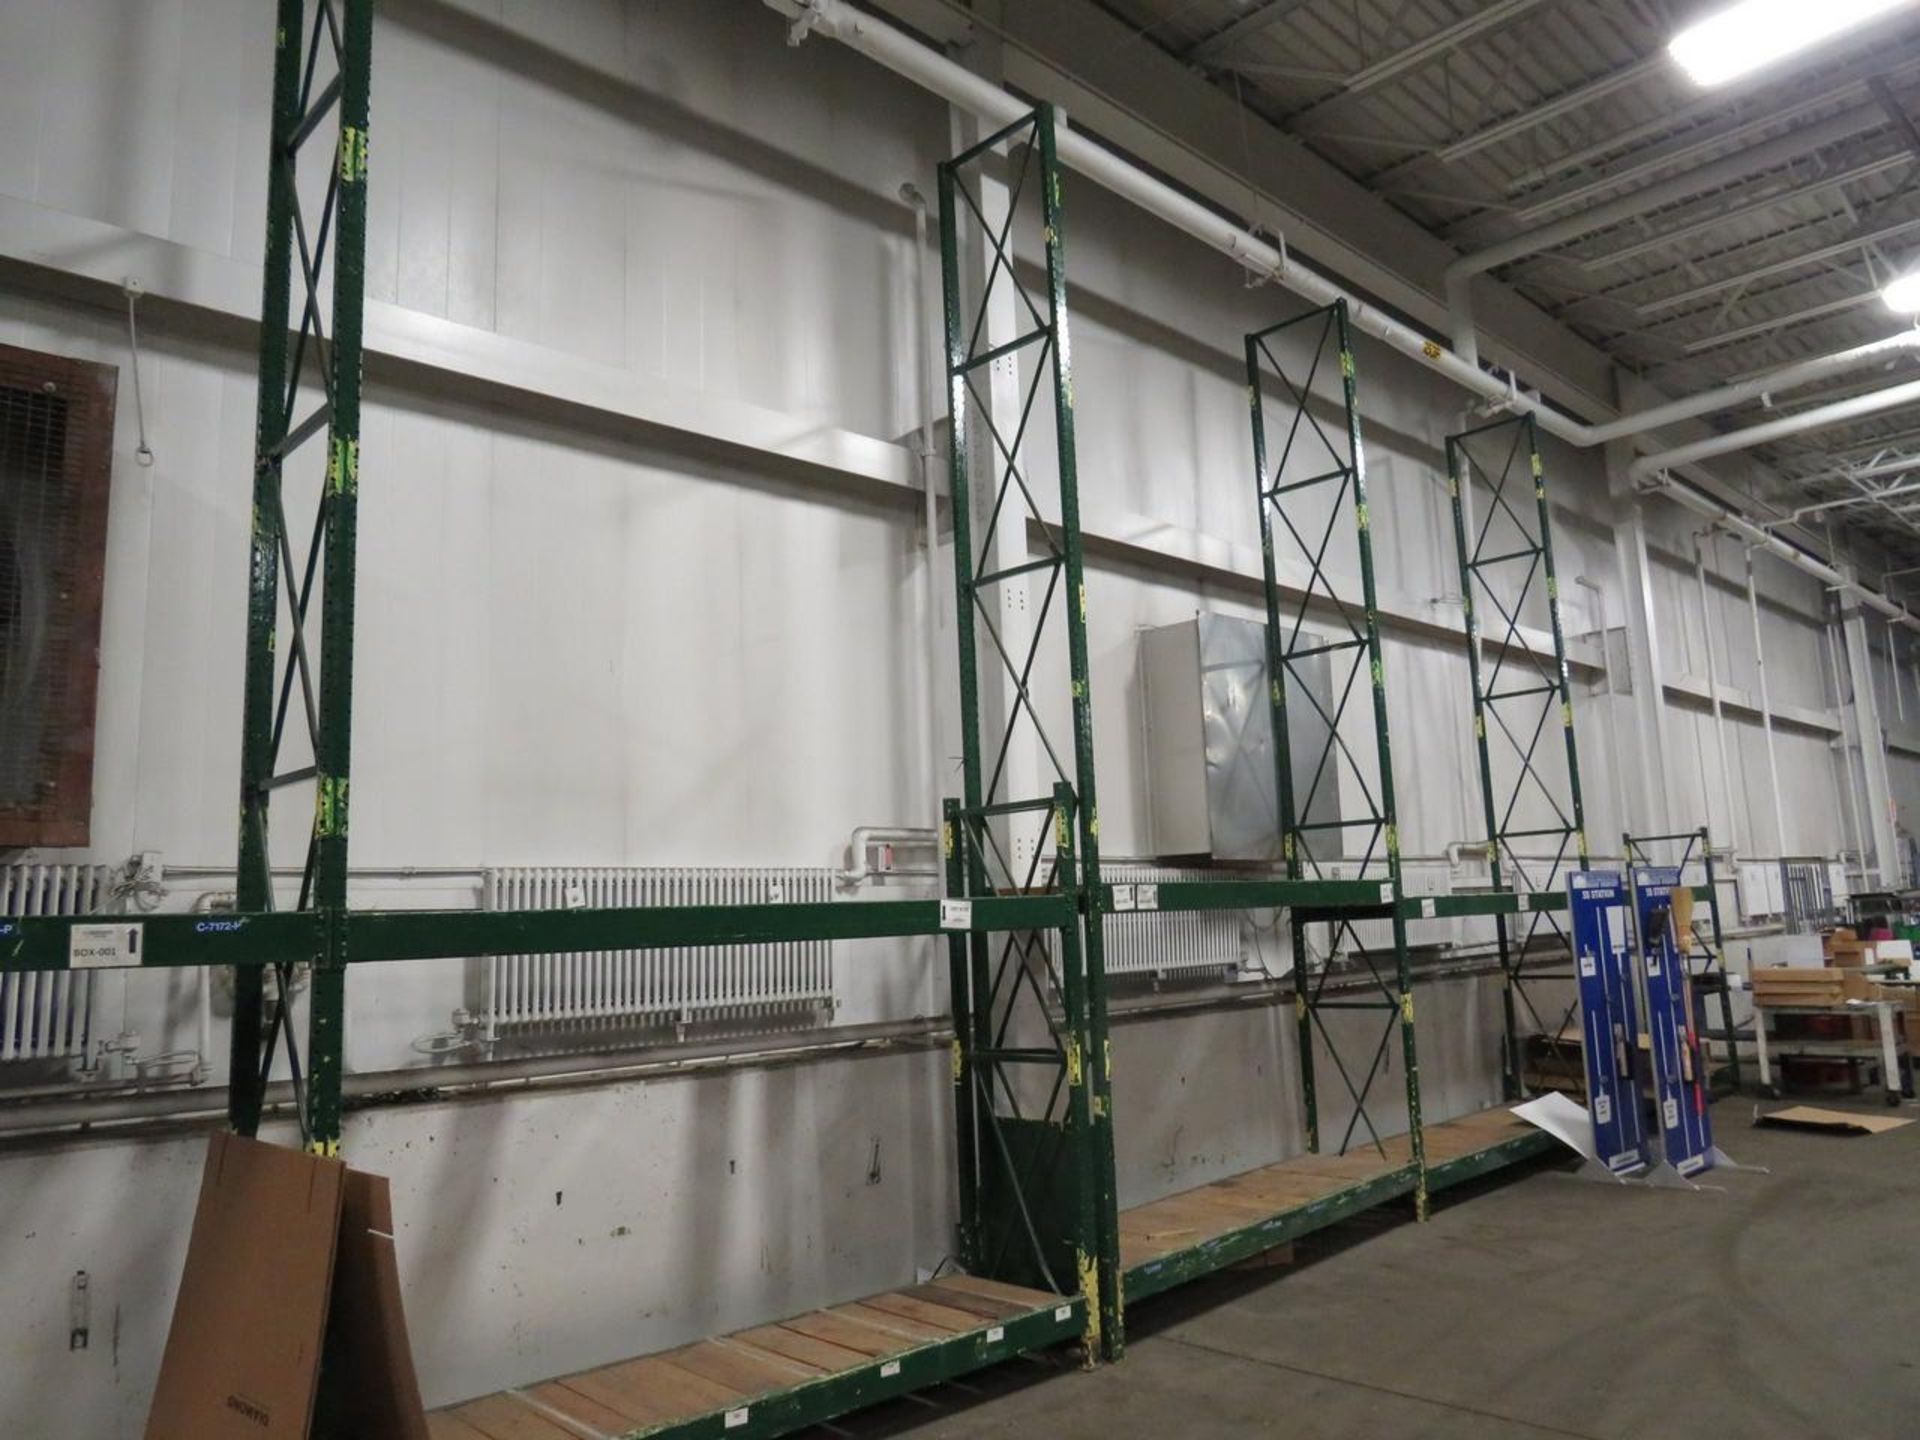 7-Sections of Pallet Racking - Image 5 of 6